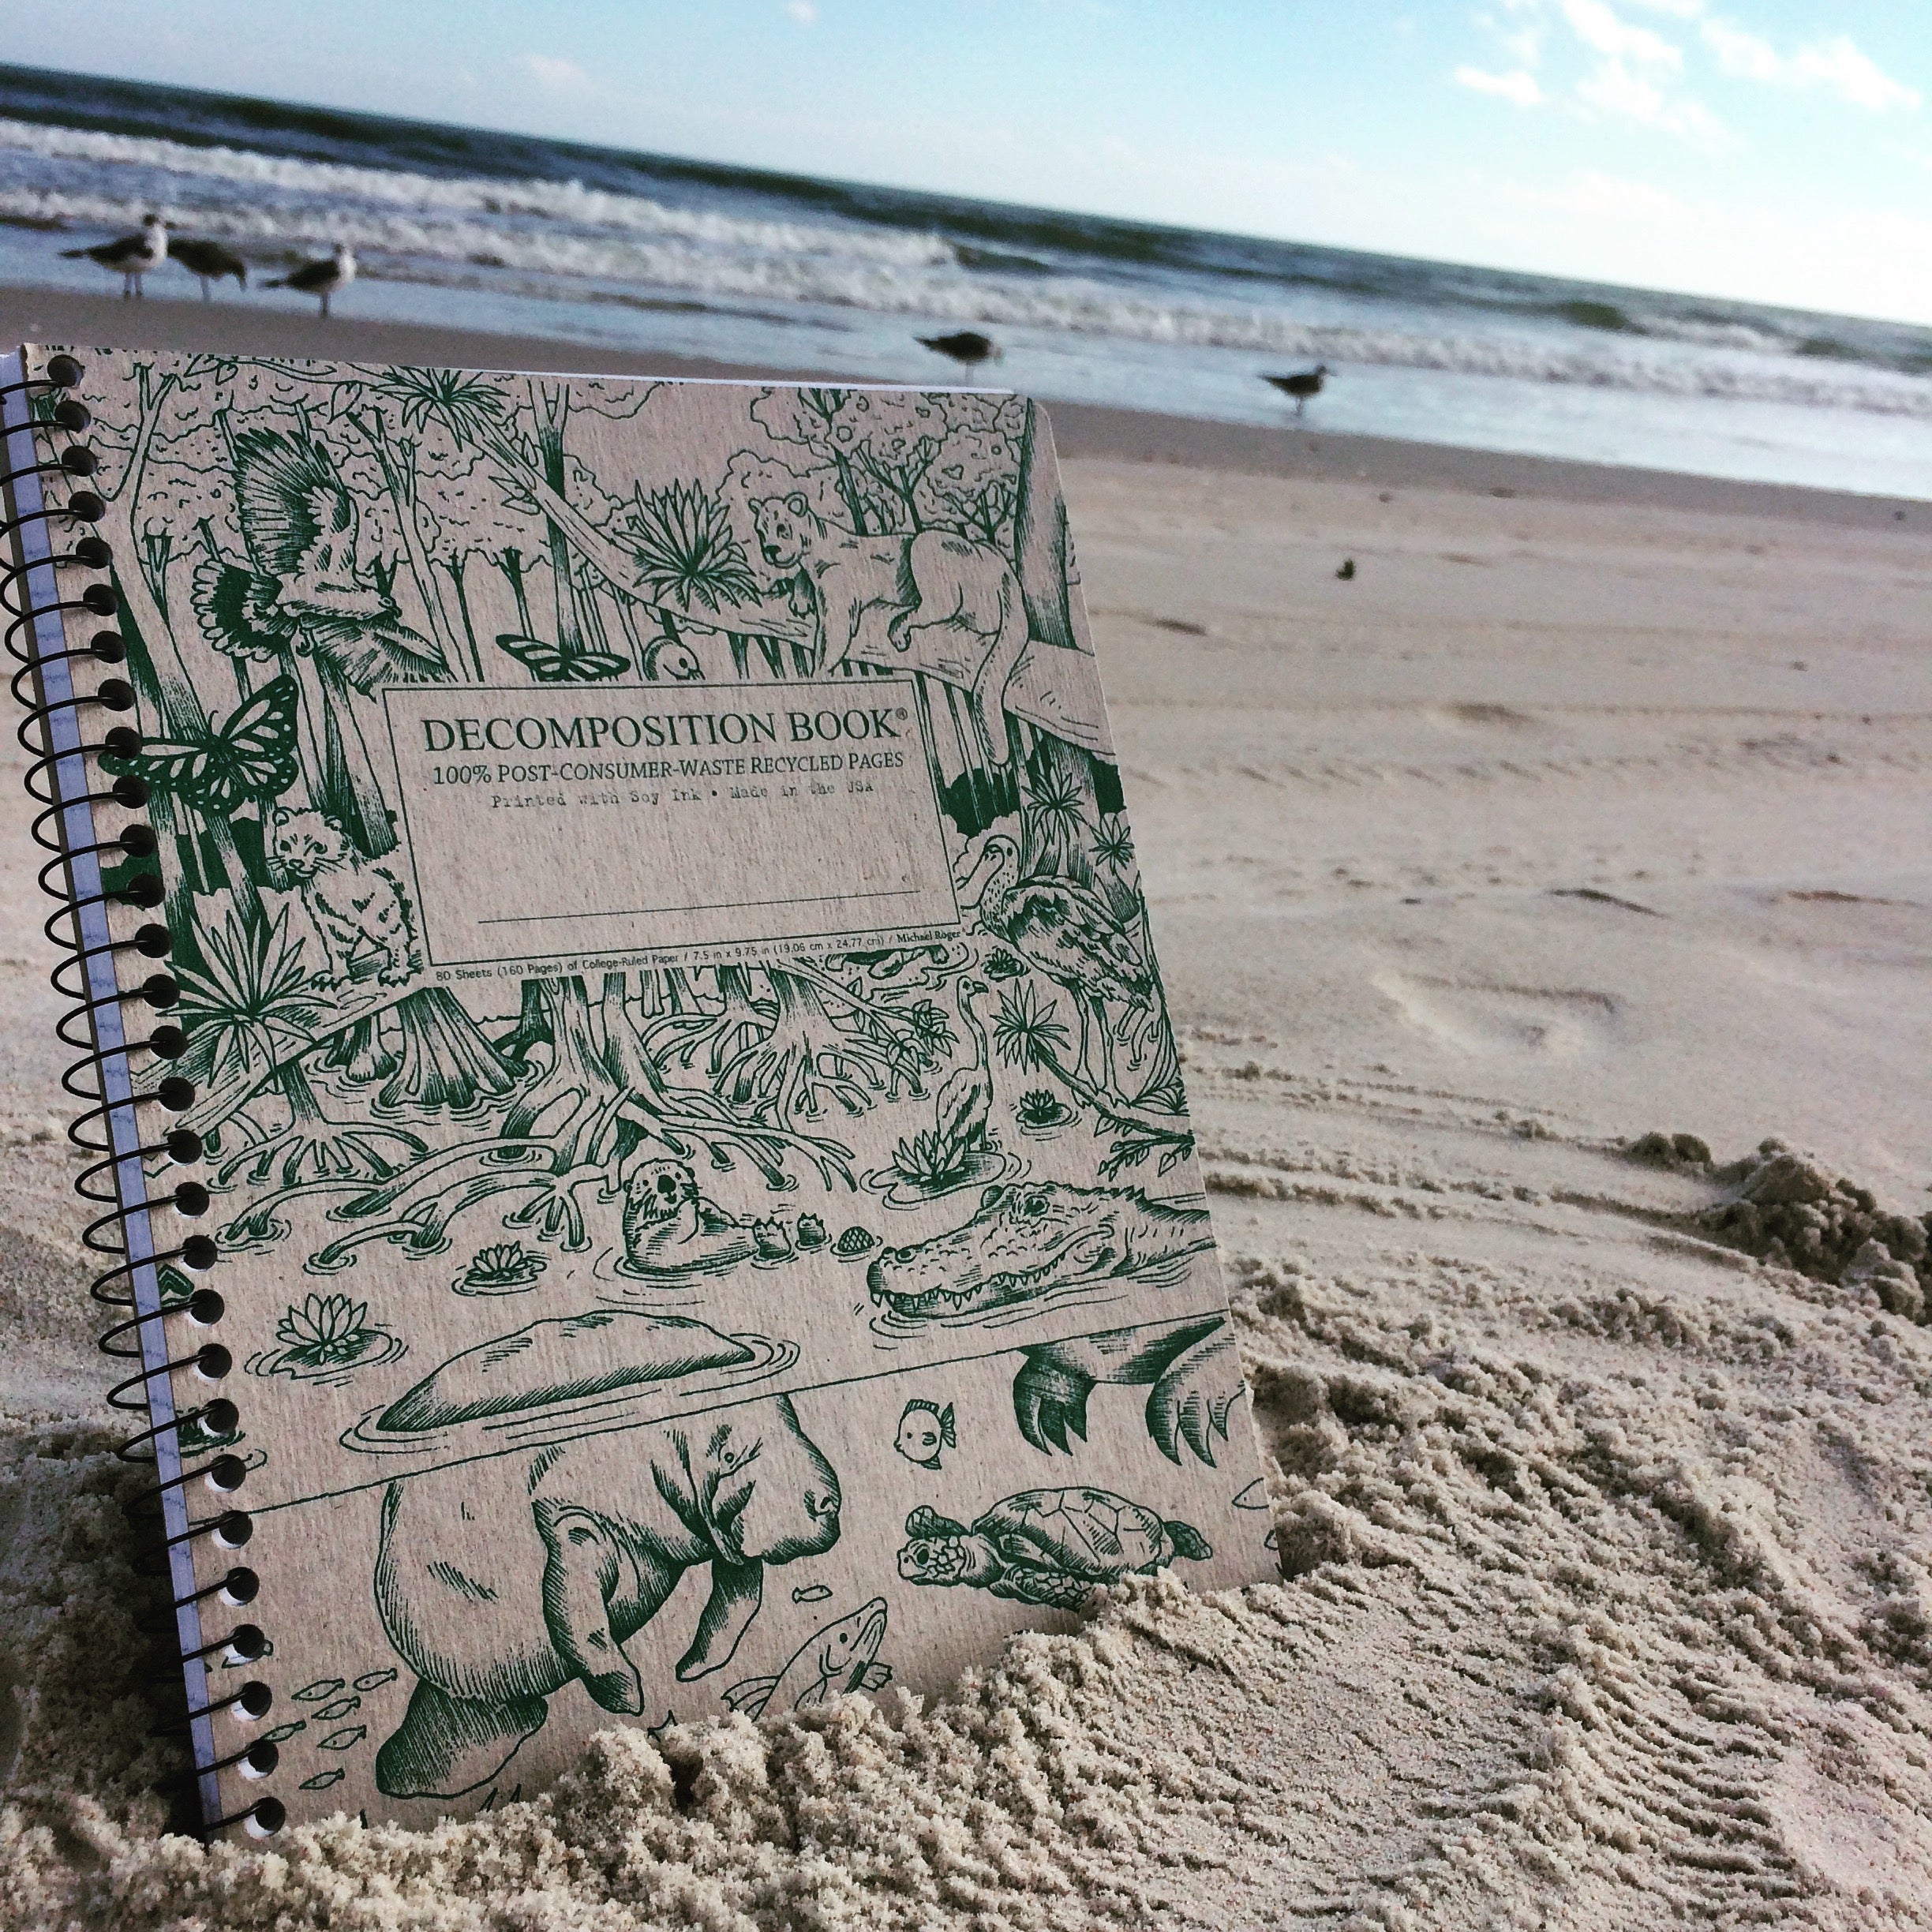 Spiral notebook lying on the beach